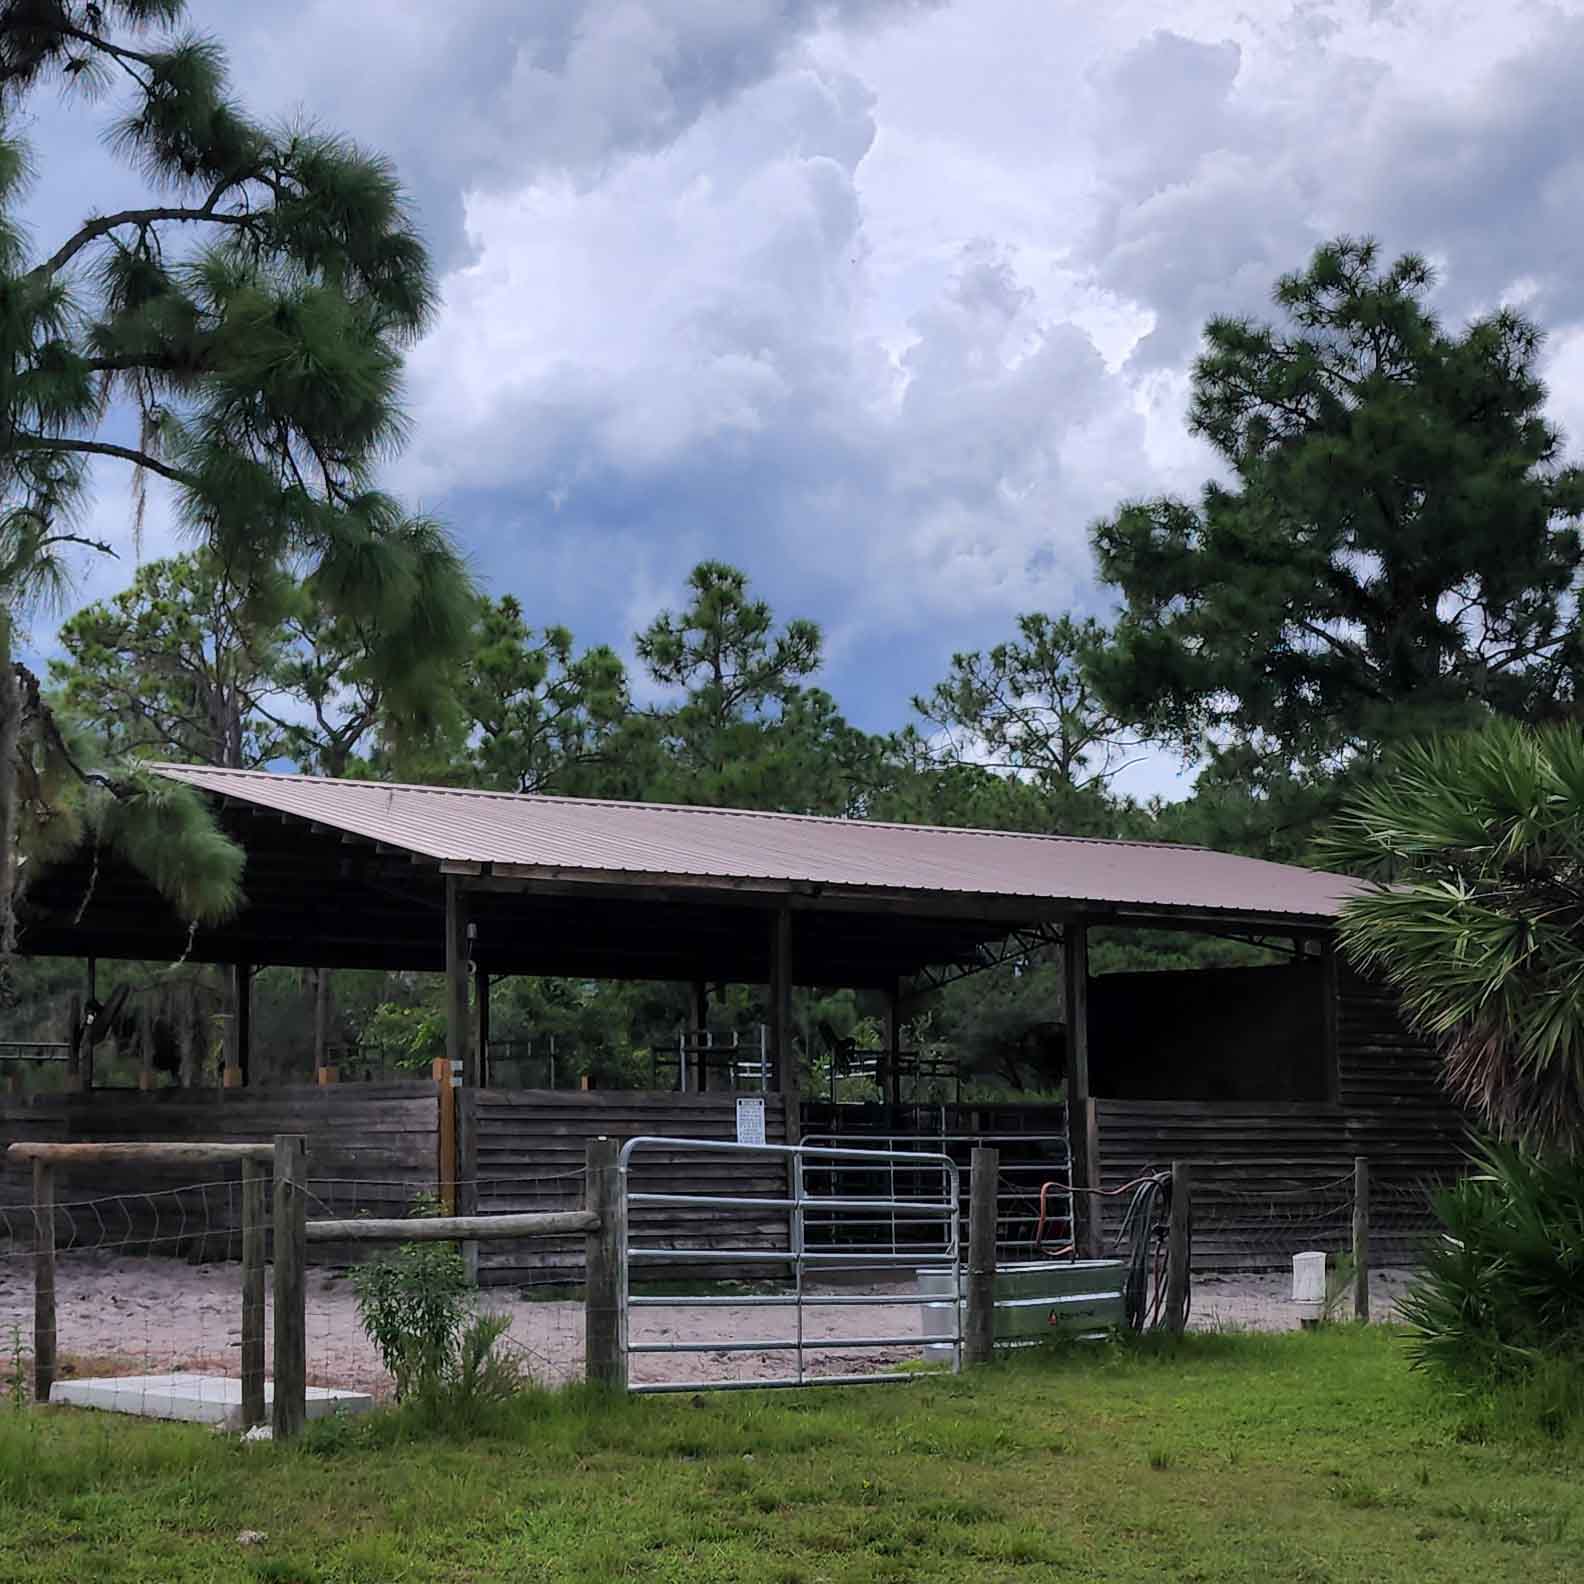 Double J's Ranch has a six stall panel barn nestled in the shade with an adjacent turnout